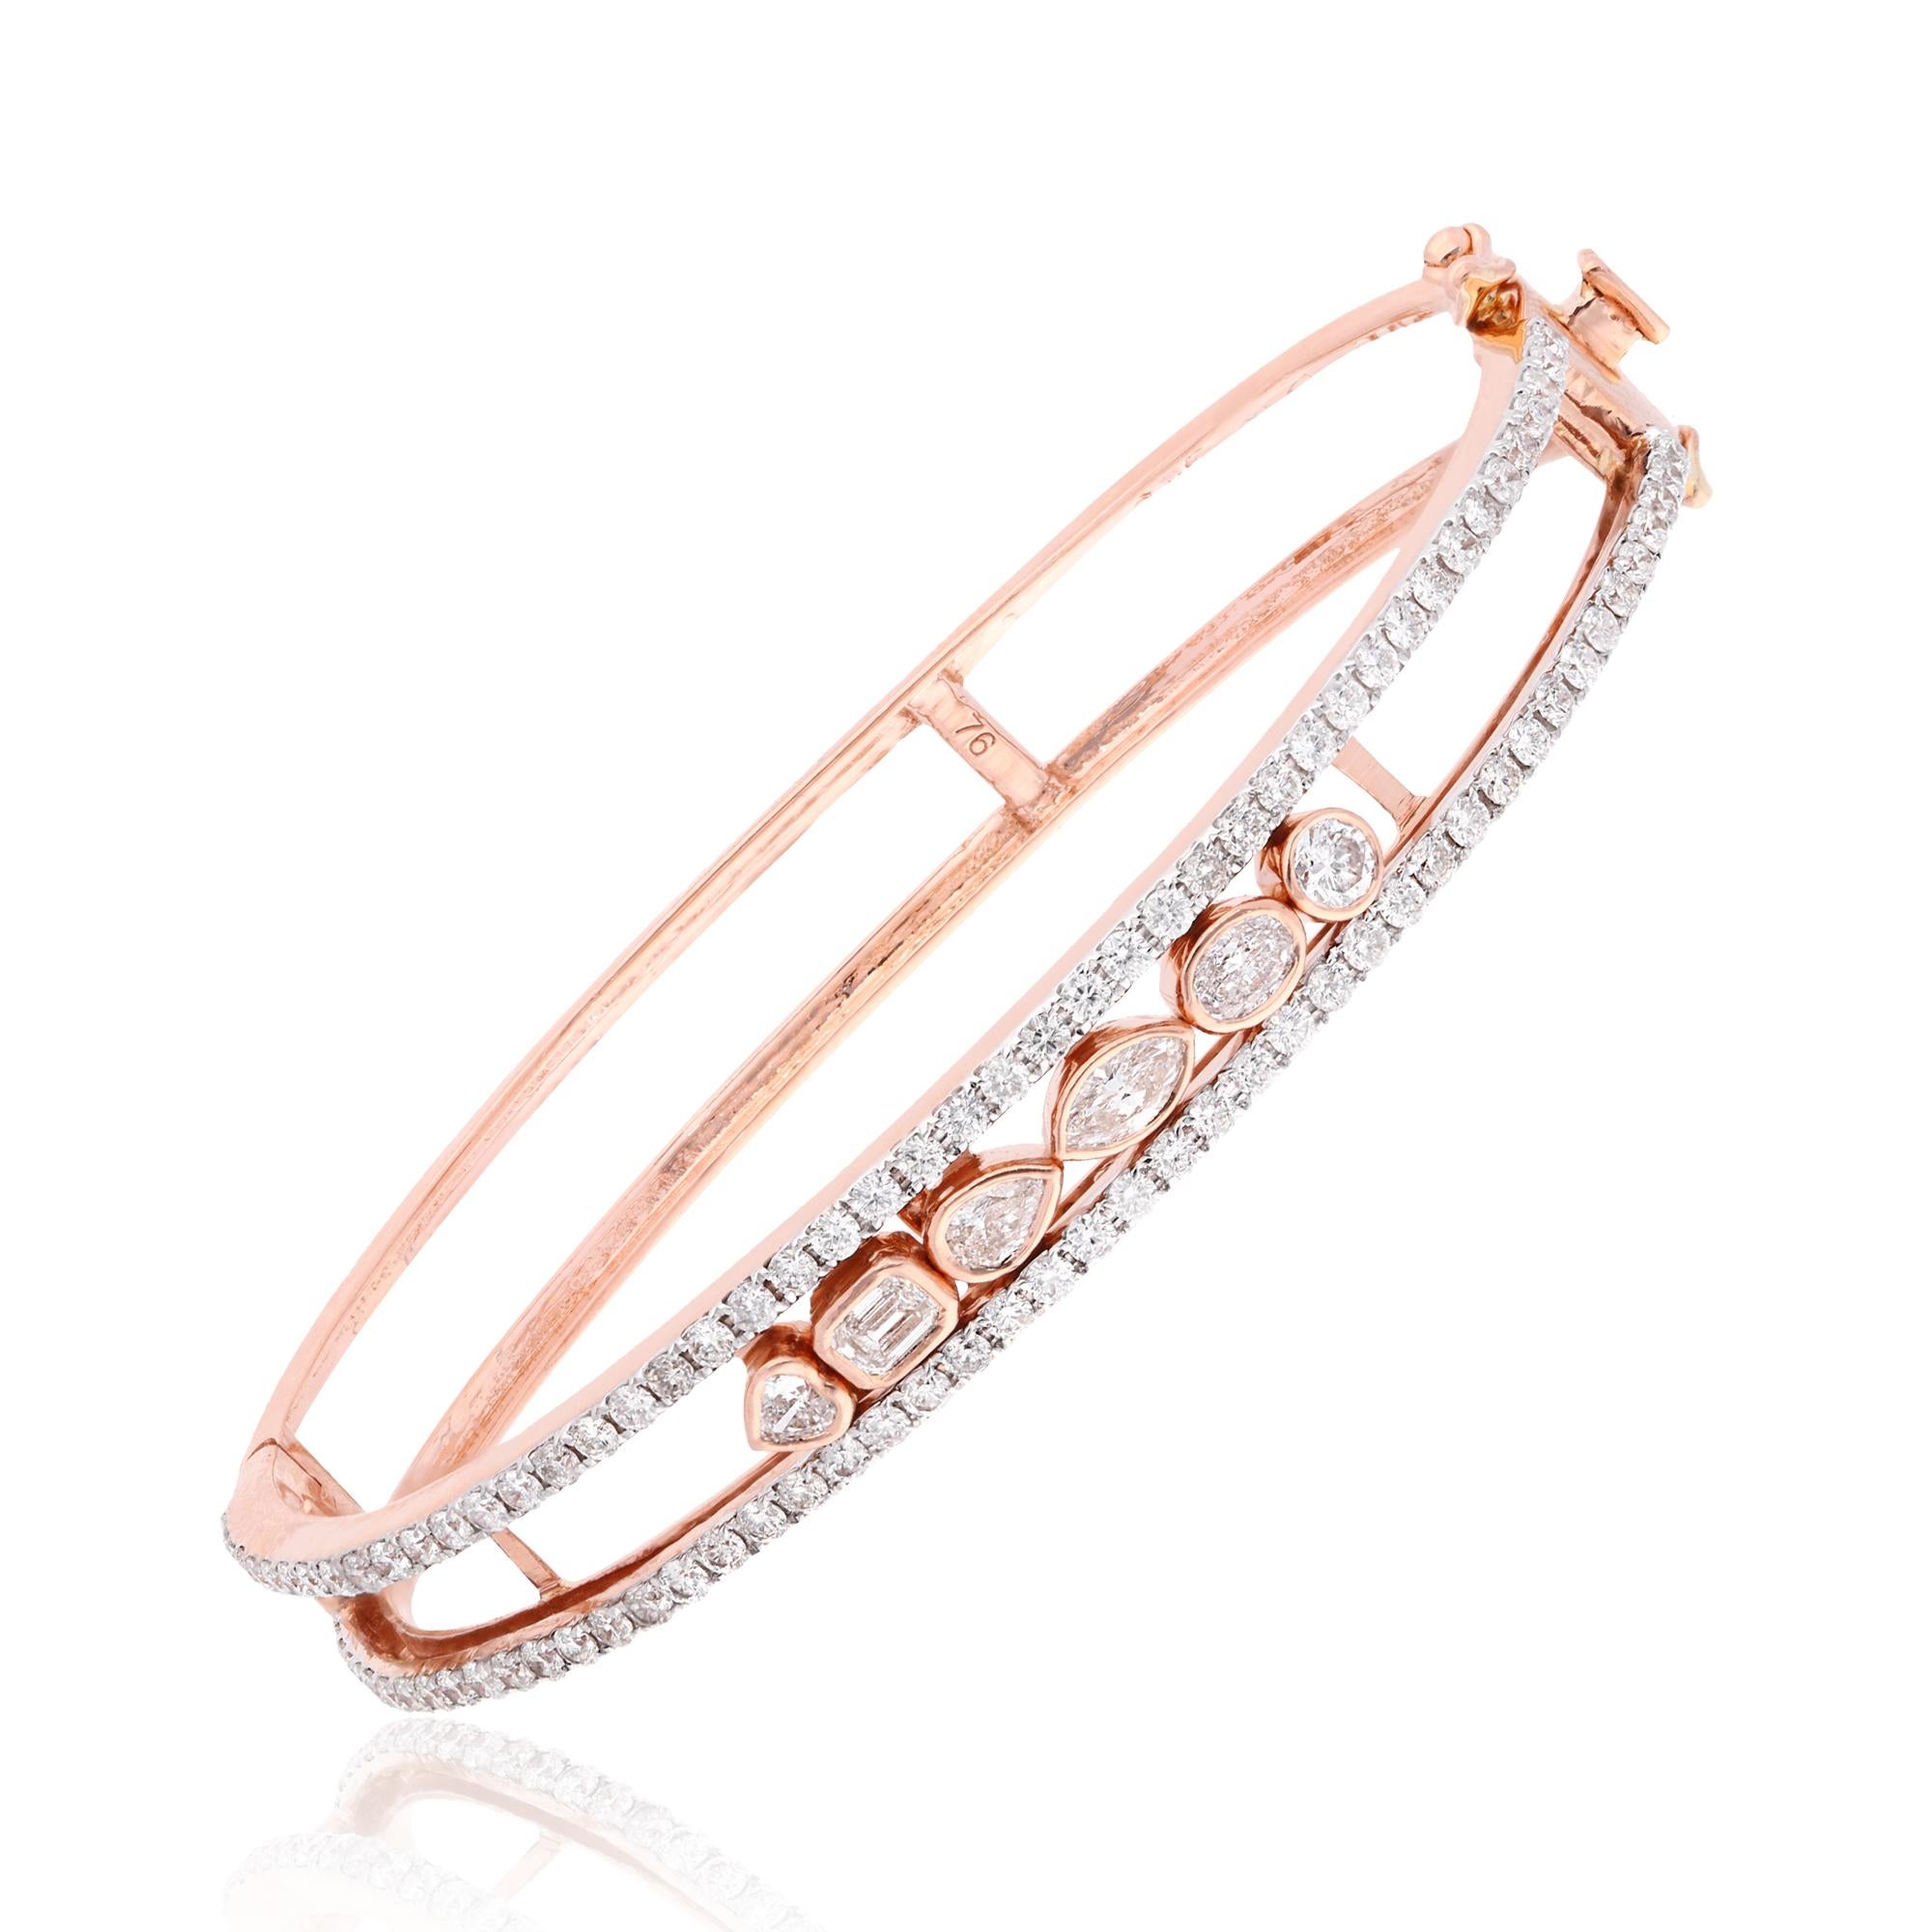 Item Code :- SEB-6324 (14k)
Gross Weight :- 13.32 gm
18k Rose Gold Weight :- 12.86 gm
Diamond Weight :- 2.30 carat  ( AVERAGE DIAMOND CLARITY SI1-SI2 & COLOR H-I )
Bracelet Size :- 59 mm approx. 
✦ Sizing
.....................
We can adjust most